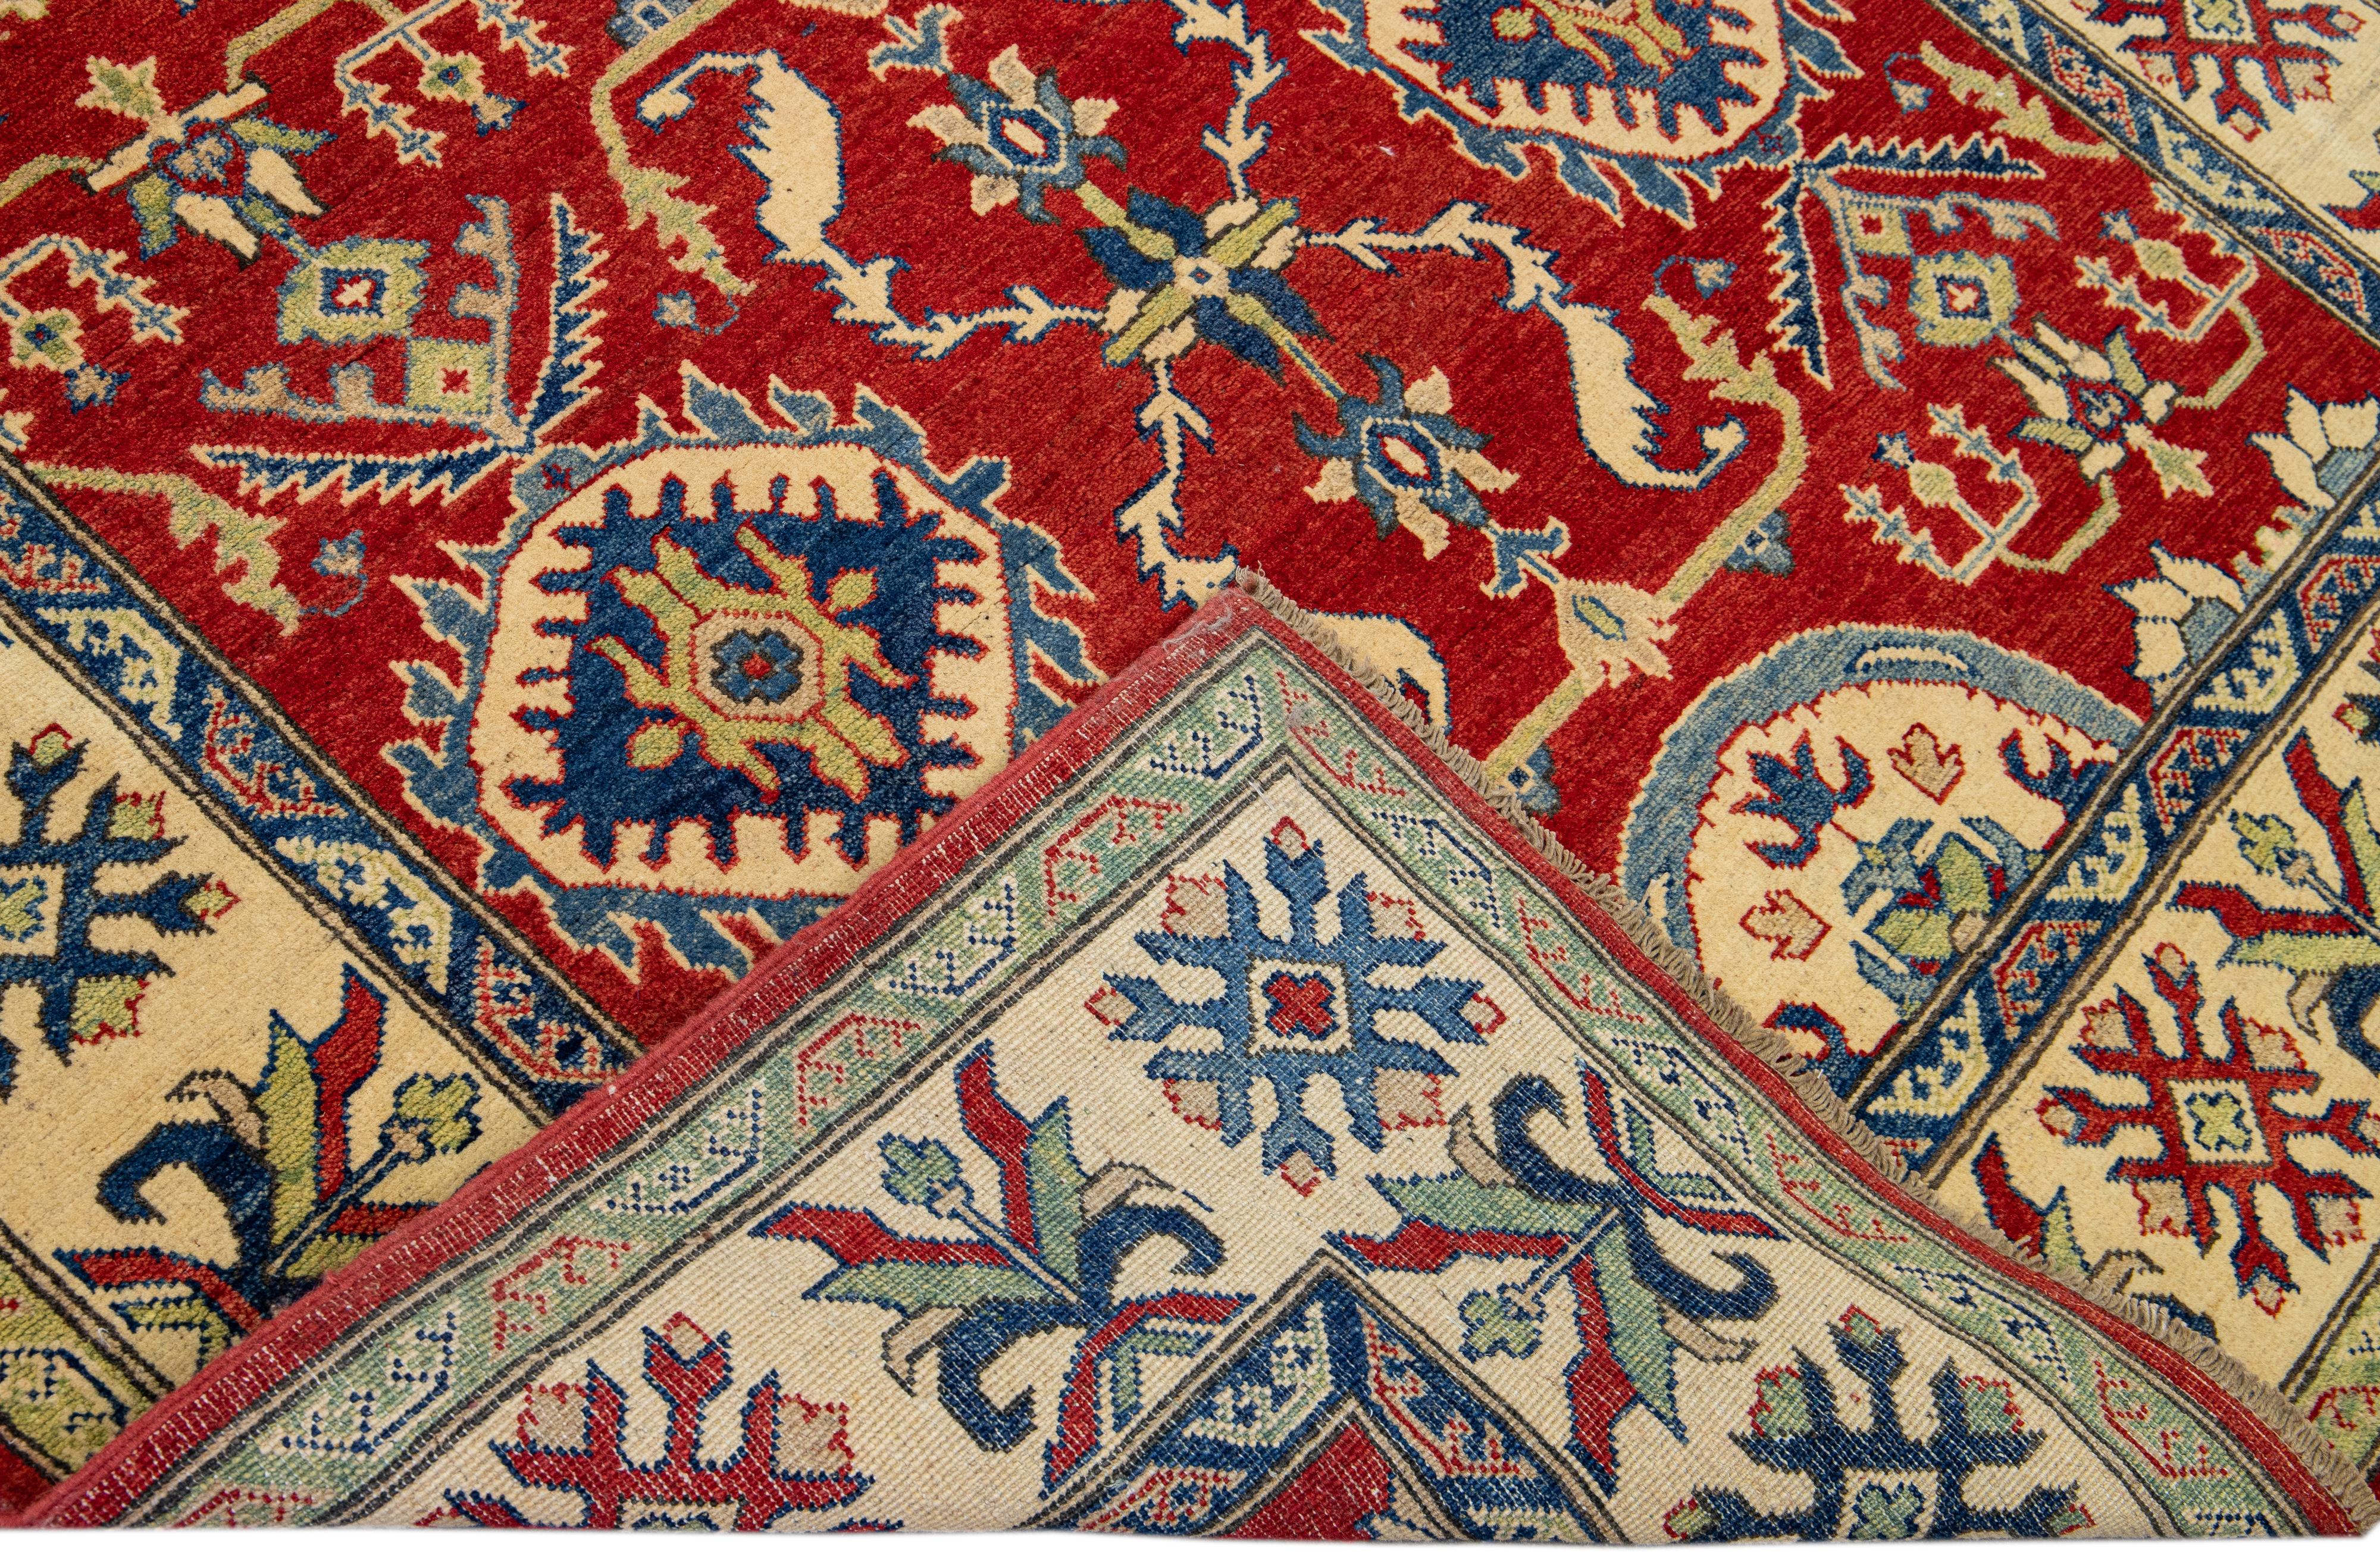 Beautiful modern Kazak hand-knotted wool rug with a red field. This rug has beige, blue, and green frame and accents that feature an all-over geometric design.

This rug measures: 5'6